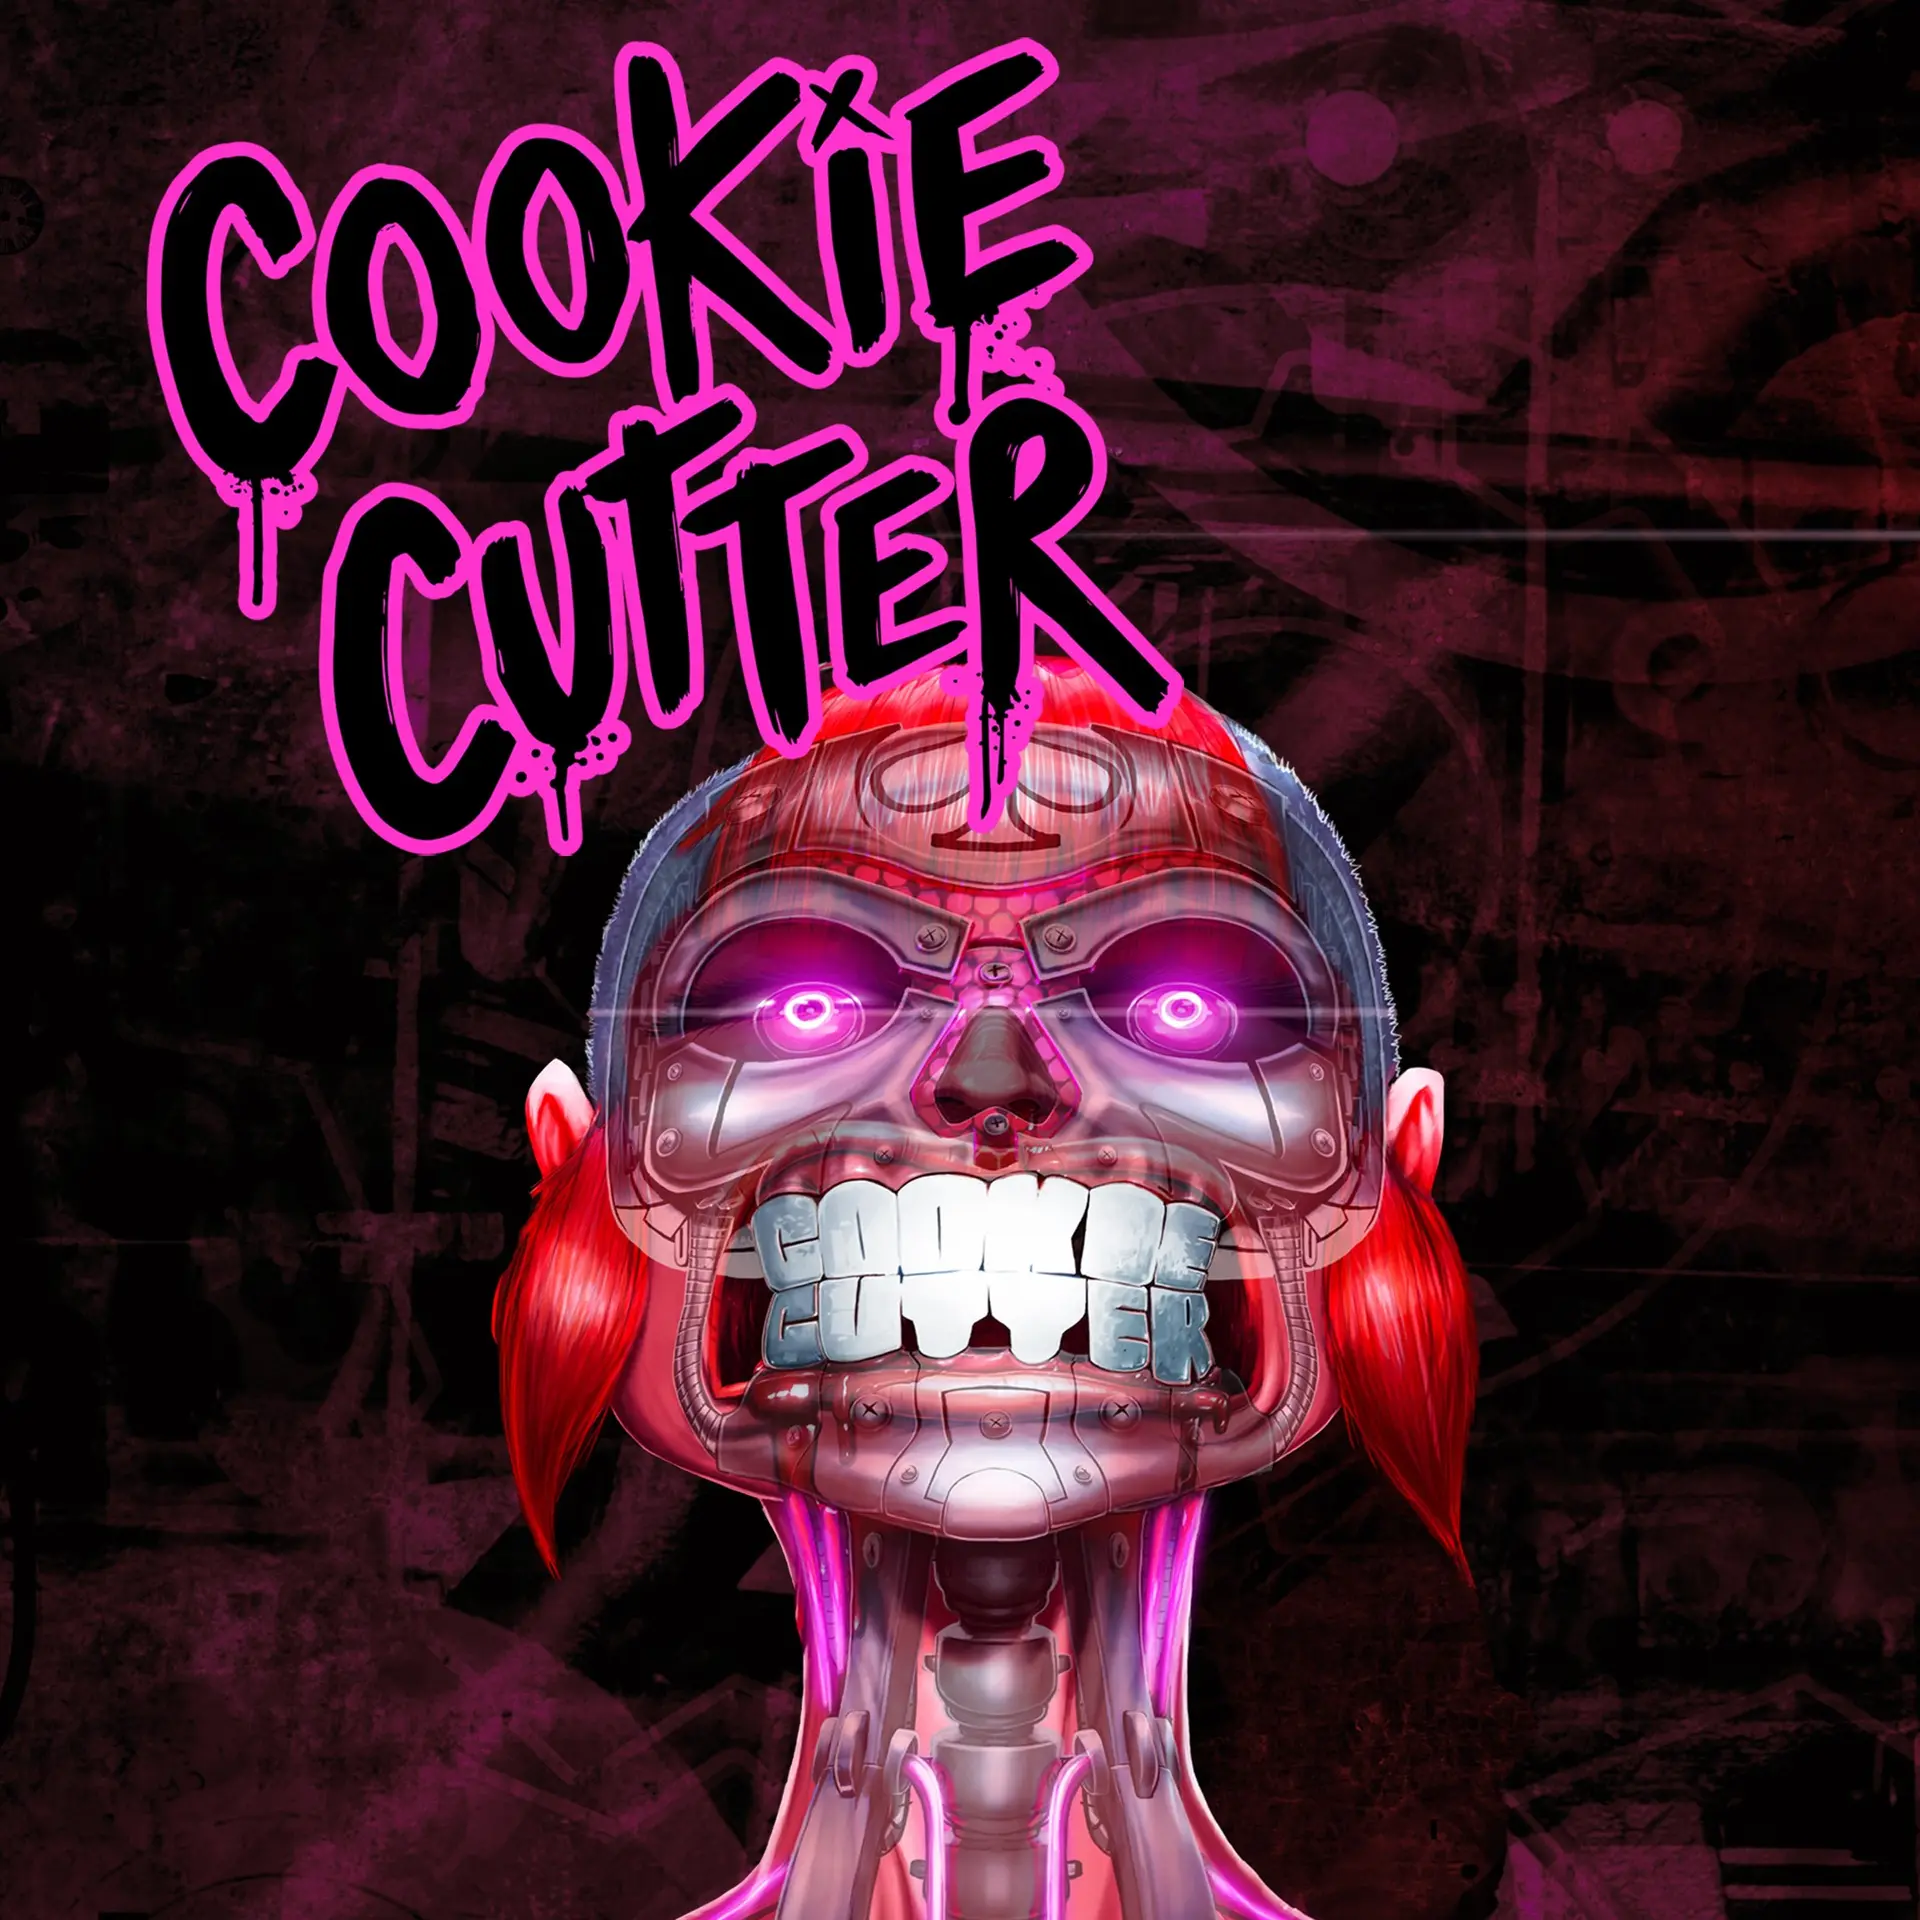 Cookie Cutter (XBOX One - Cheapest Store)